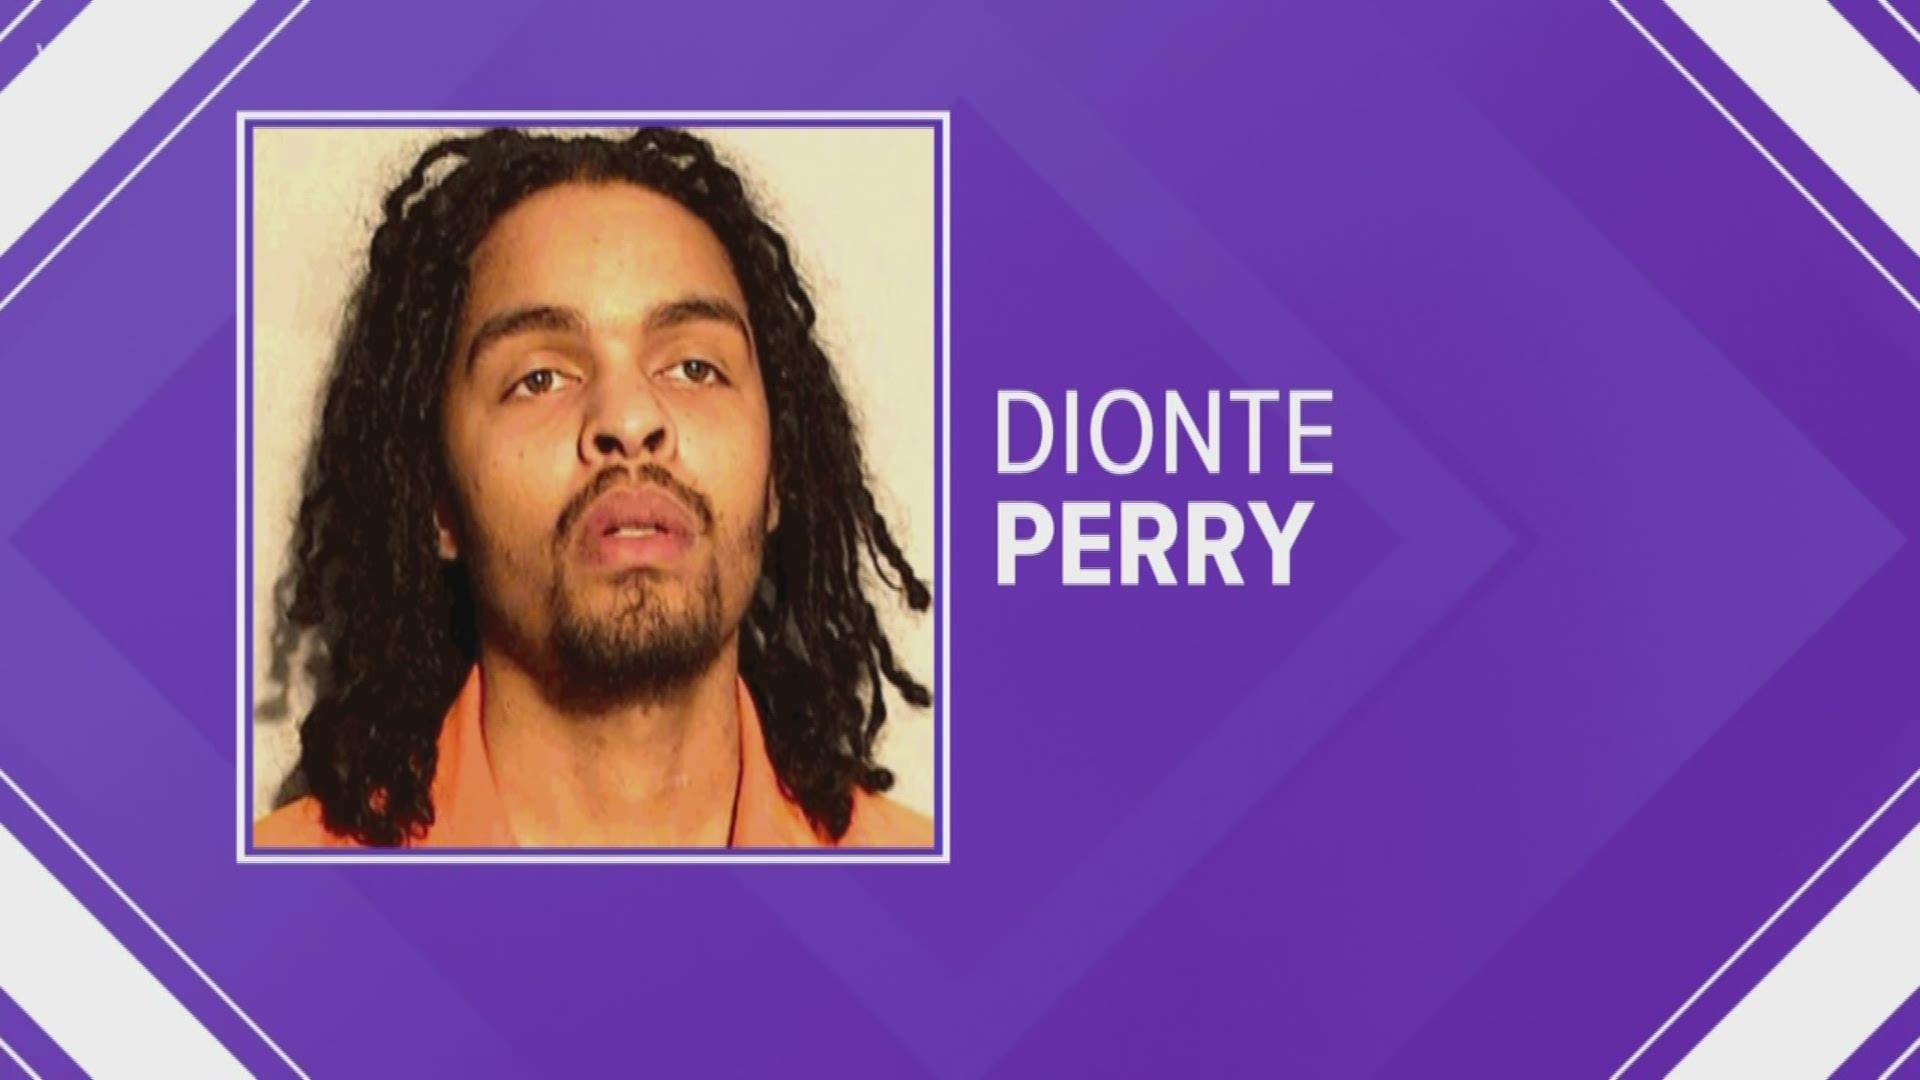 Dionte Perry is accused of shooting and killing Tavion Belcher in west Toledo last year.